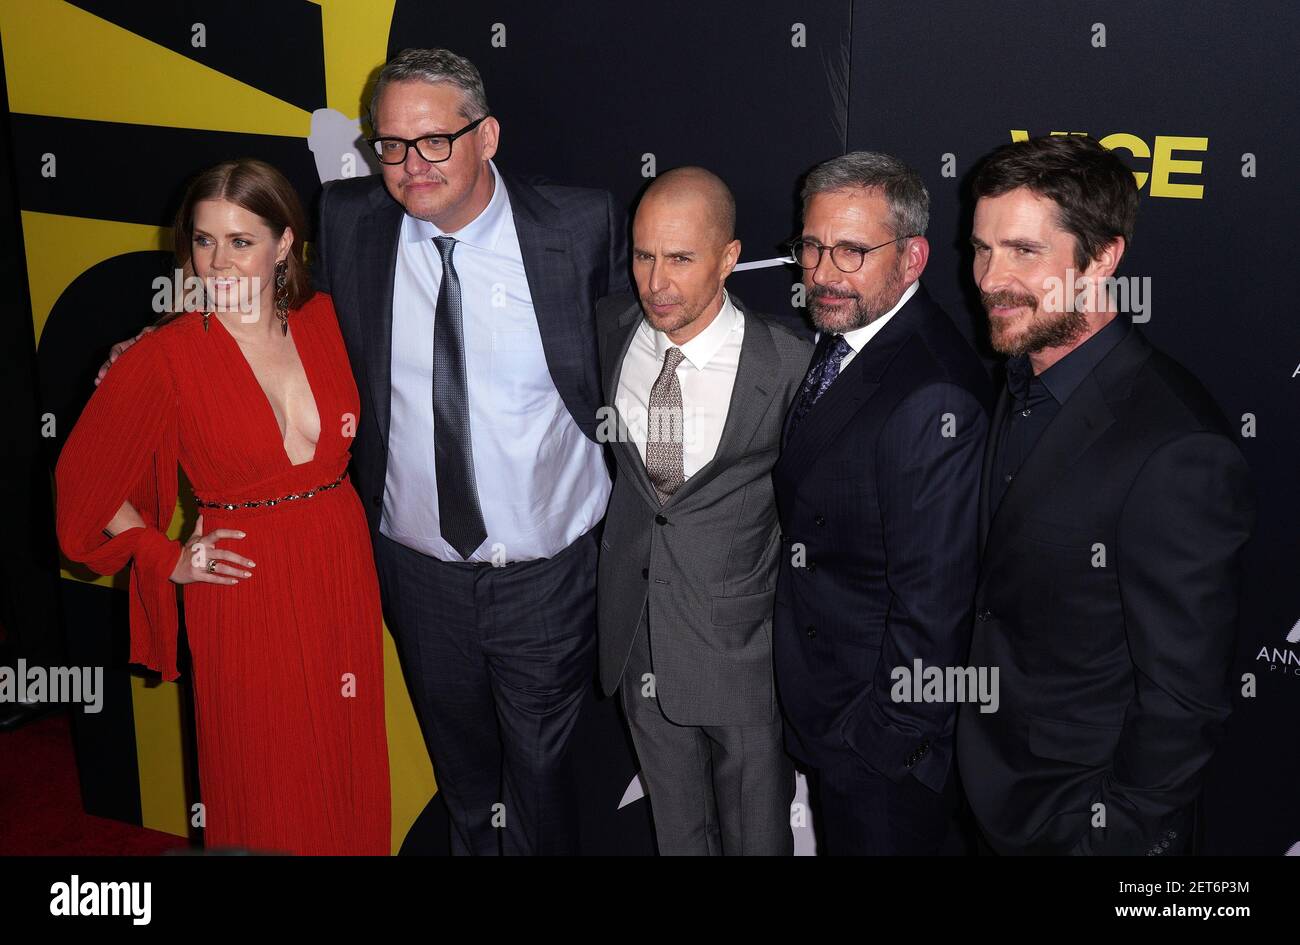 Sam Rockwell, Amy Adams, Adam McKay, Christian Bale and Steve Carell at  "Vice" World Premiere held at Samuel Goldwyn Theater on December 11, 2018  in Beverly Hills, CA, USA (Photo by JC